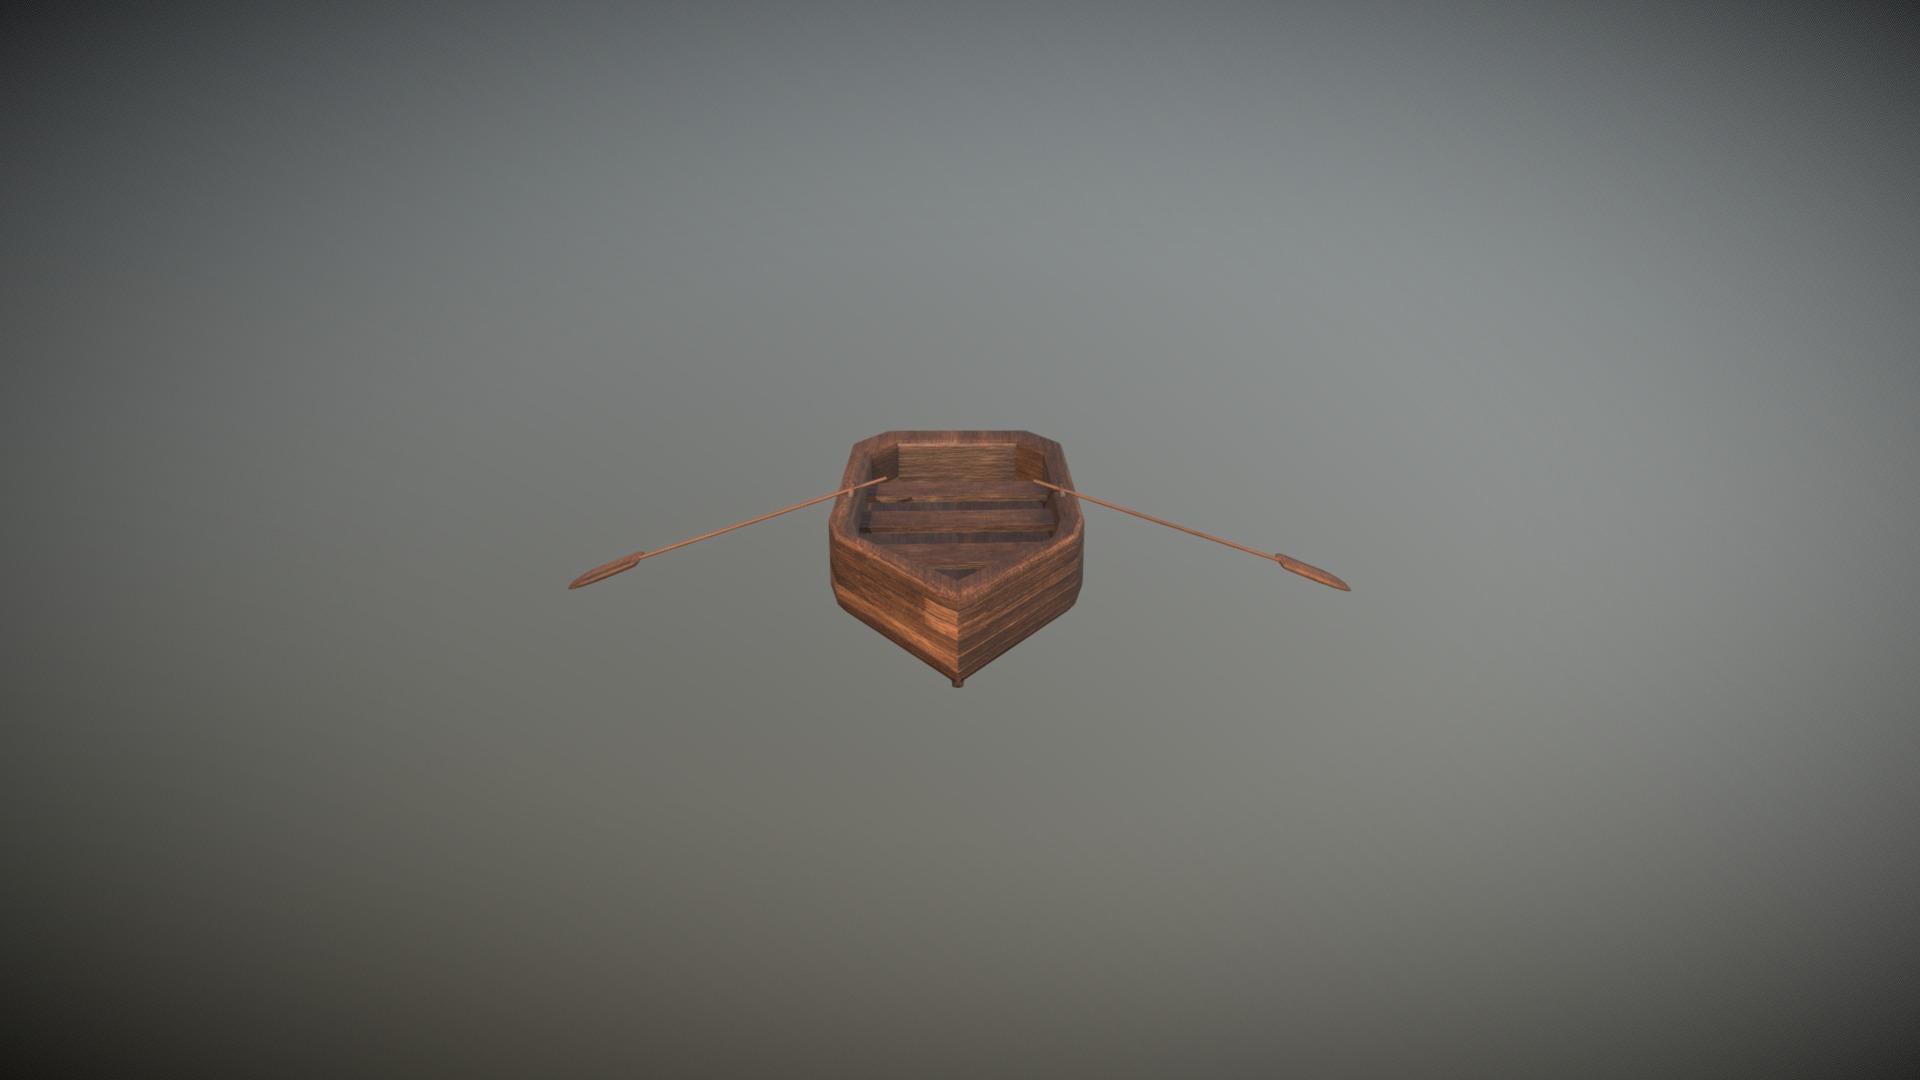 3D model Boat - This is a 3D model of the Boat. The 3D model is about a wooden chair with a string attached.